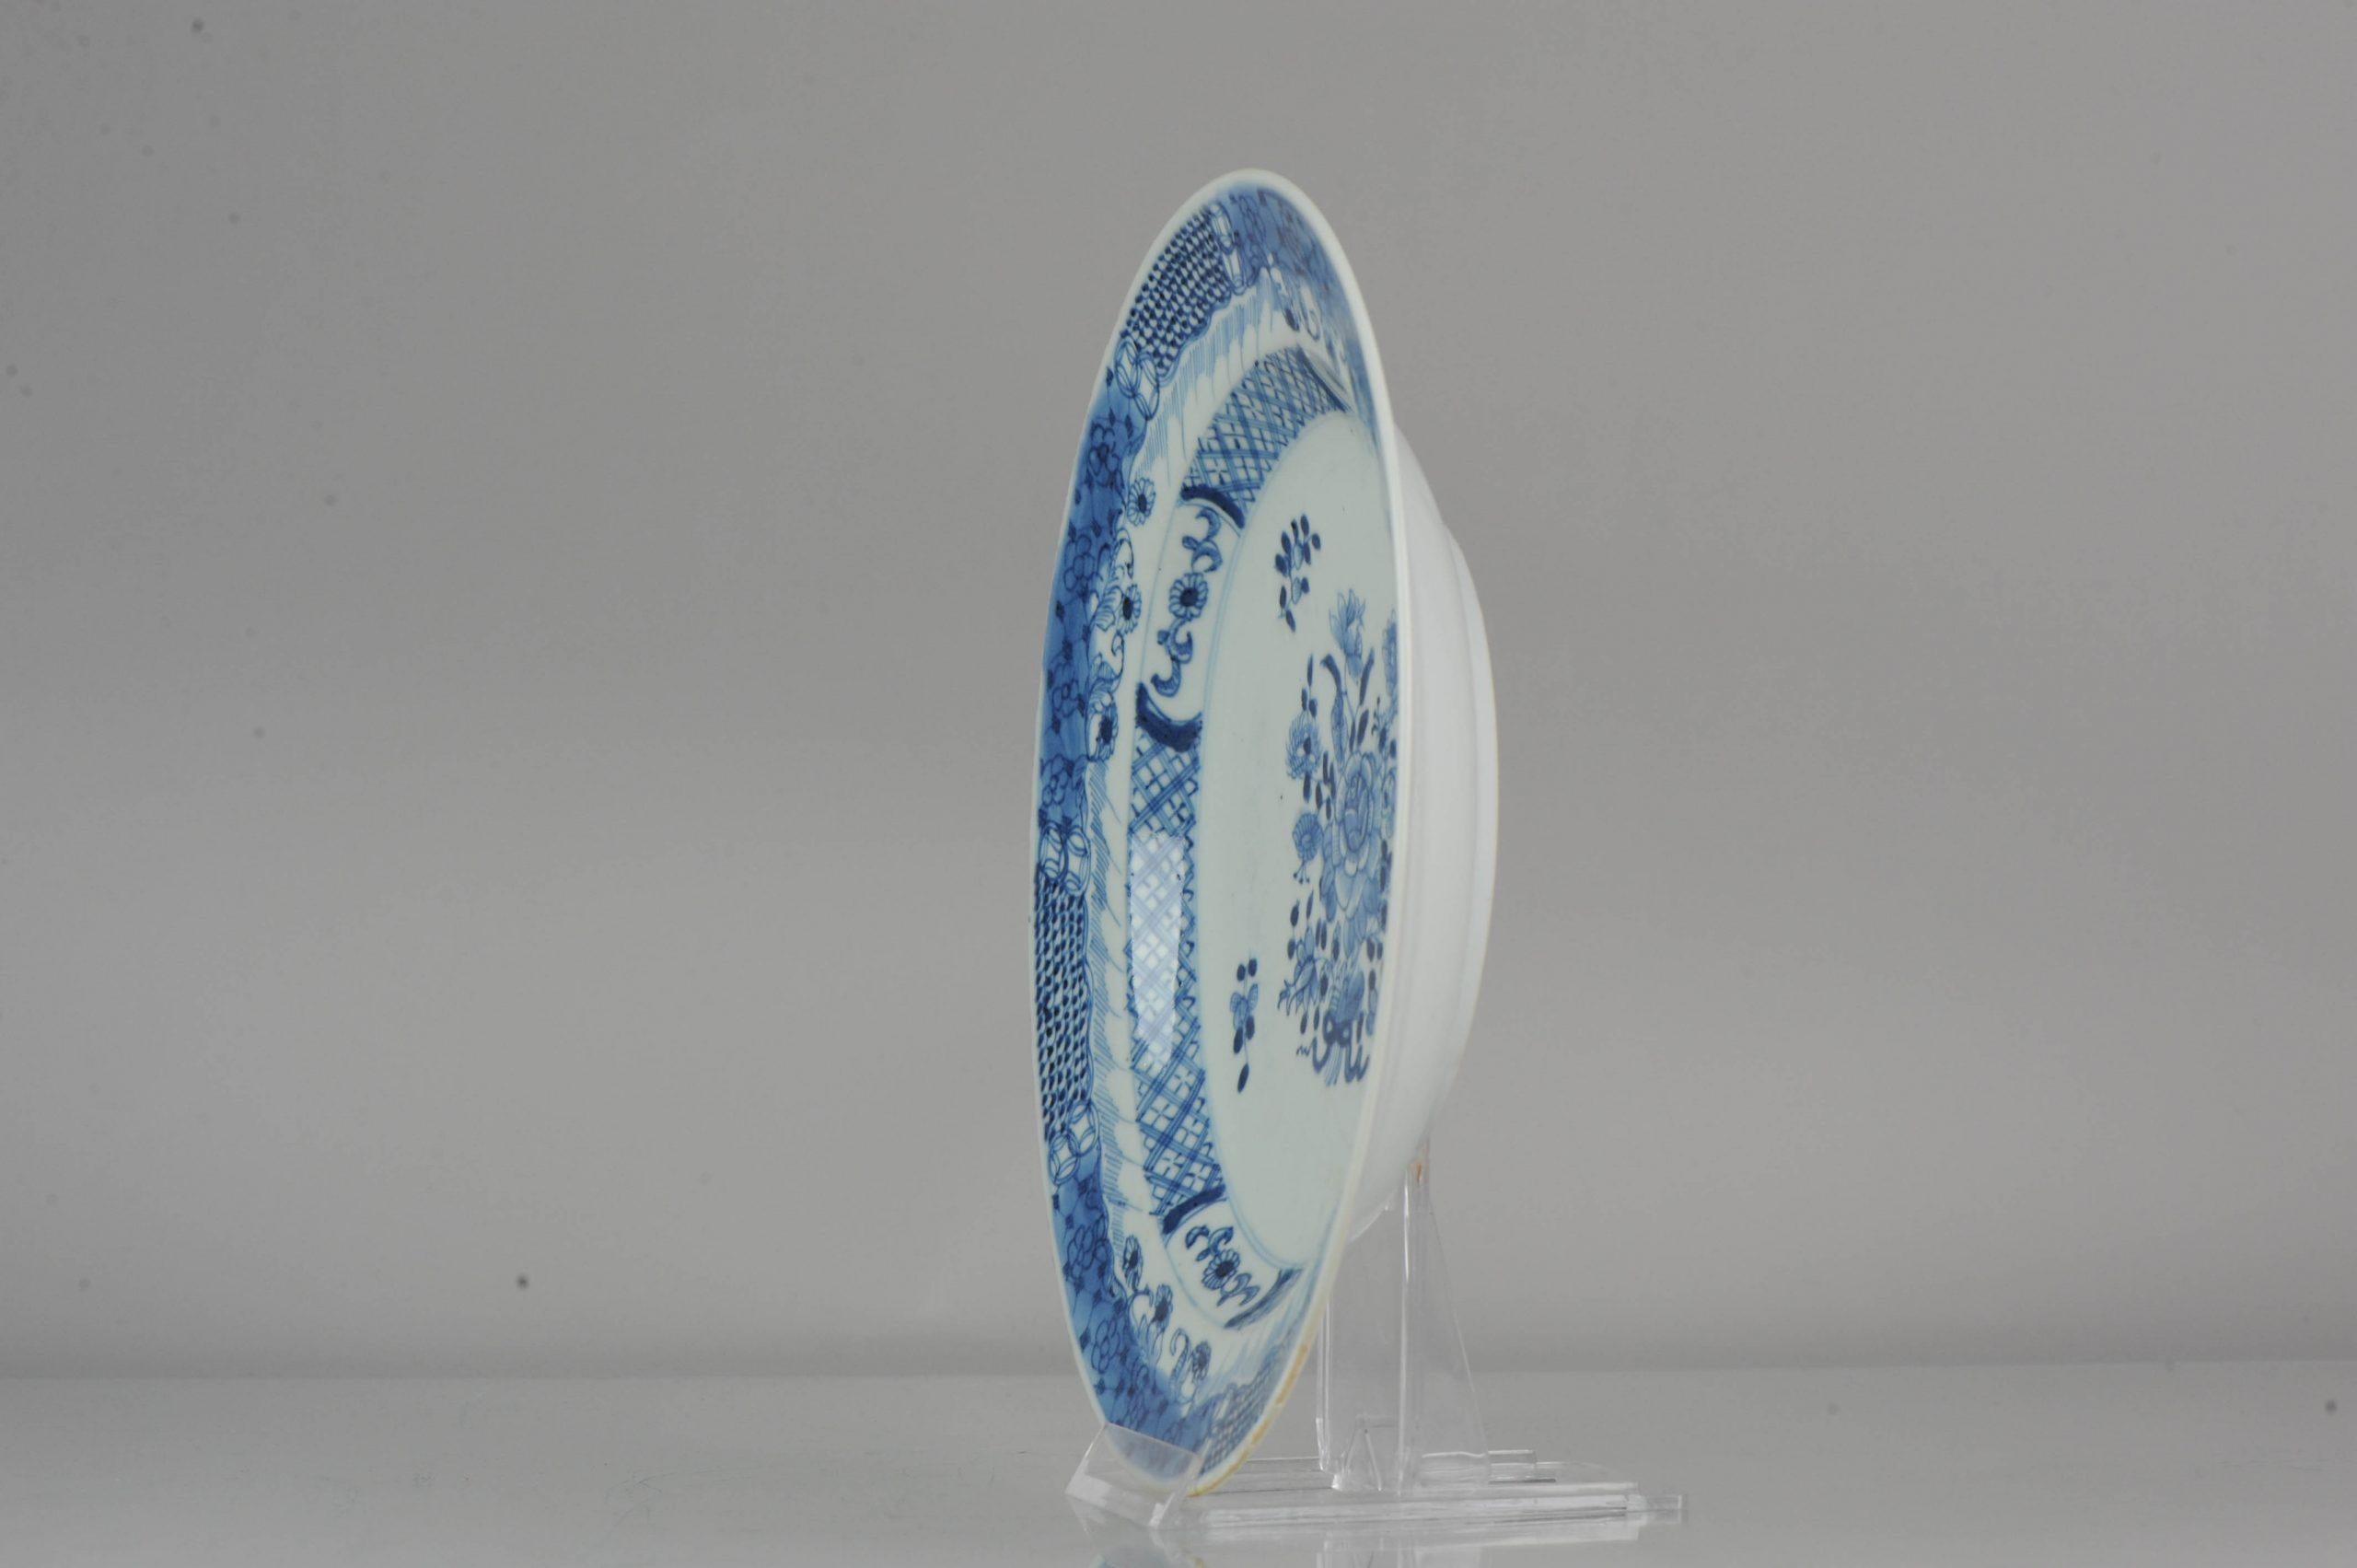 A nice plate. Qing Dynasty - Qing Period.

29-11-19-9-1

Additional information:
Material: Porcelain
Type: Bowls
Region of Origin: China
Period: 18th century Qing (1661 - 1912)
Age: Pre-1800
Condition: Overall Condition; Chips, frits 1 hairline.